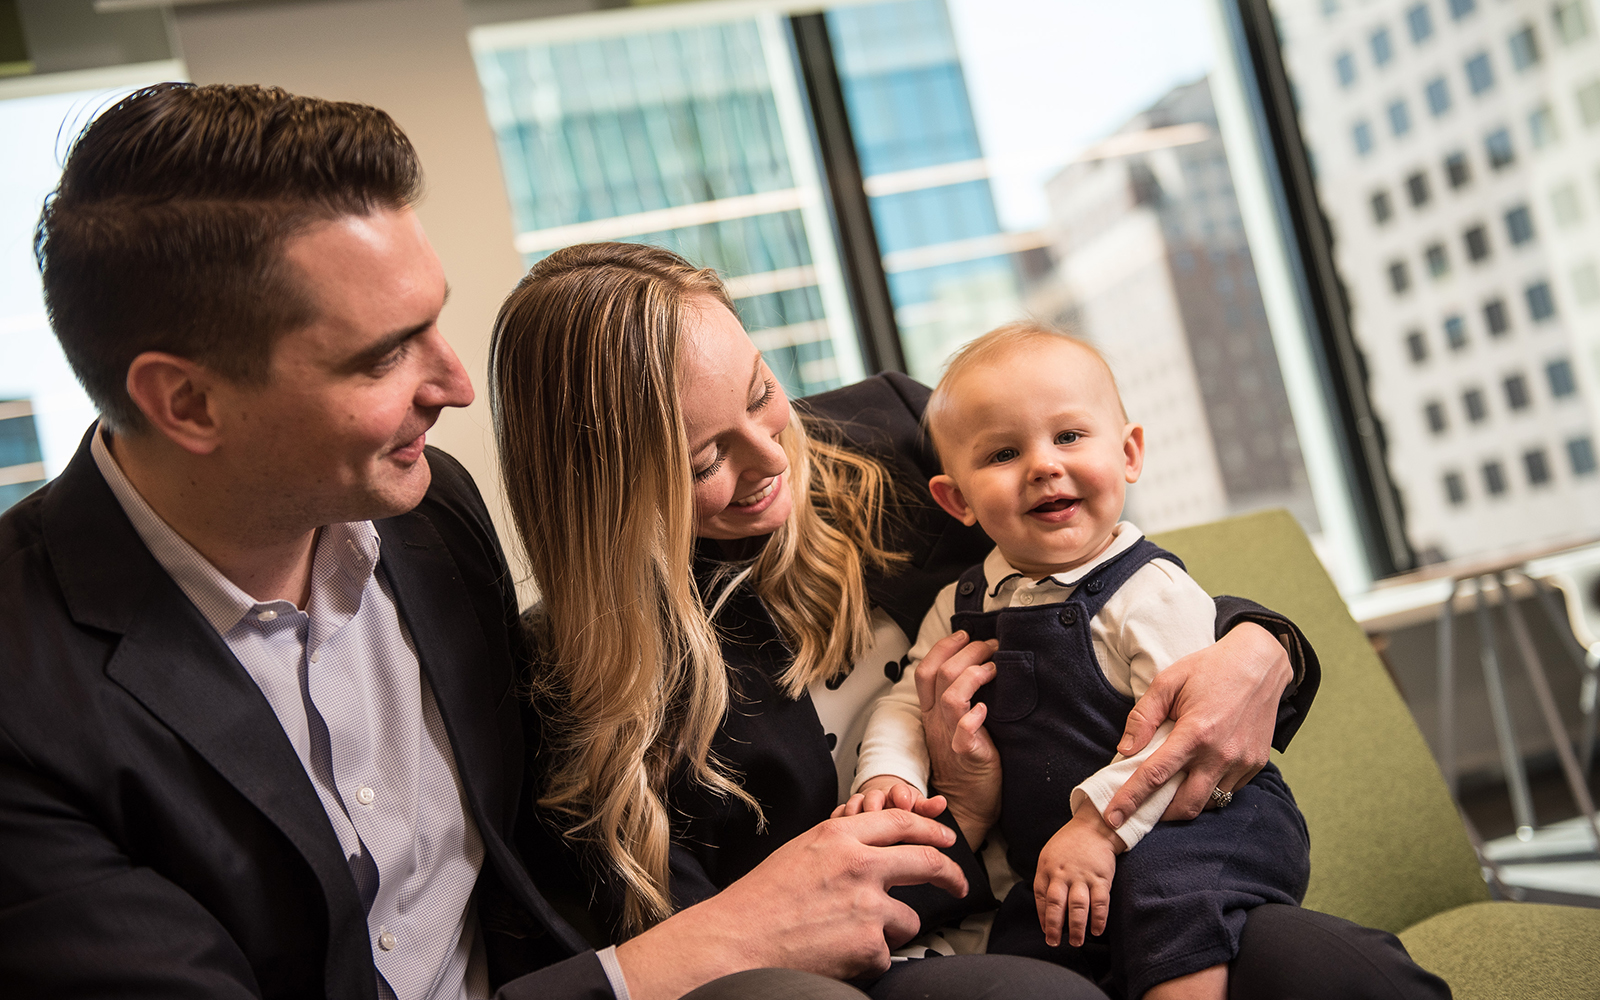 Chris DiGiacomo (left) and his wife Julie Marquis DiGiacomo (right) balanced work, marriage, and childbirth to earn their MBAs through UConn's PMBA program. (Nathan Oldham / UConn School of Business)